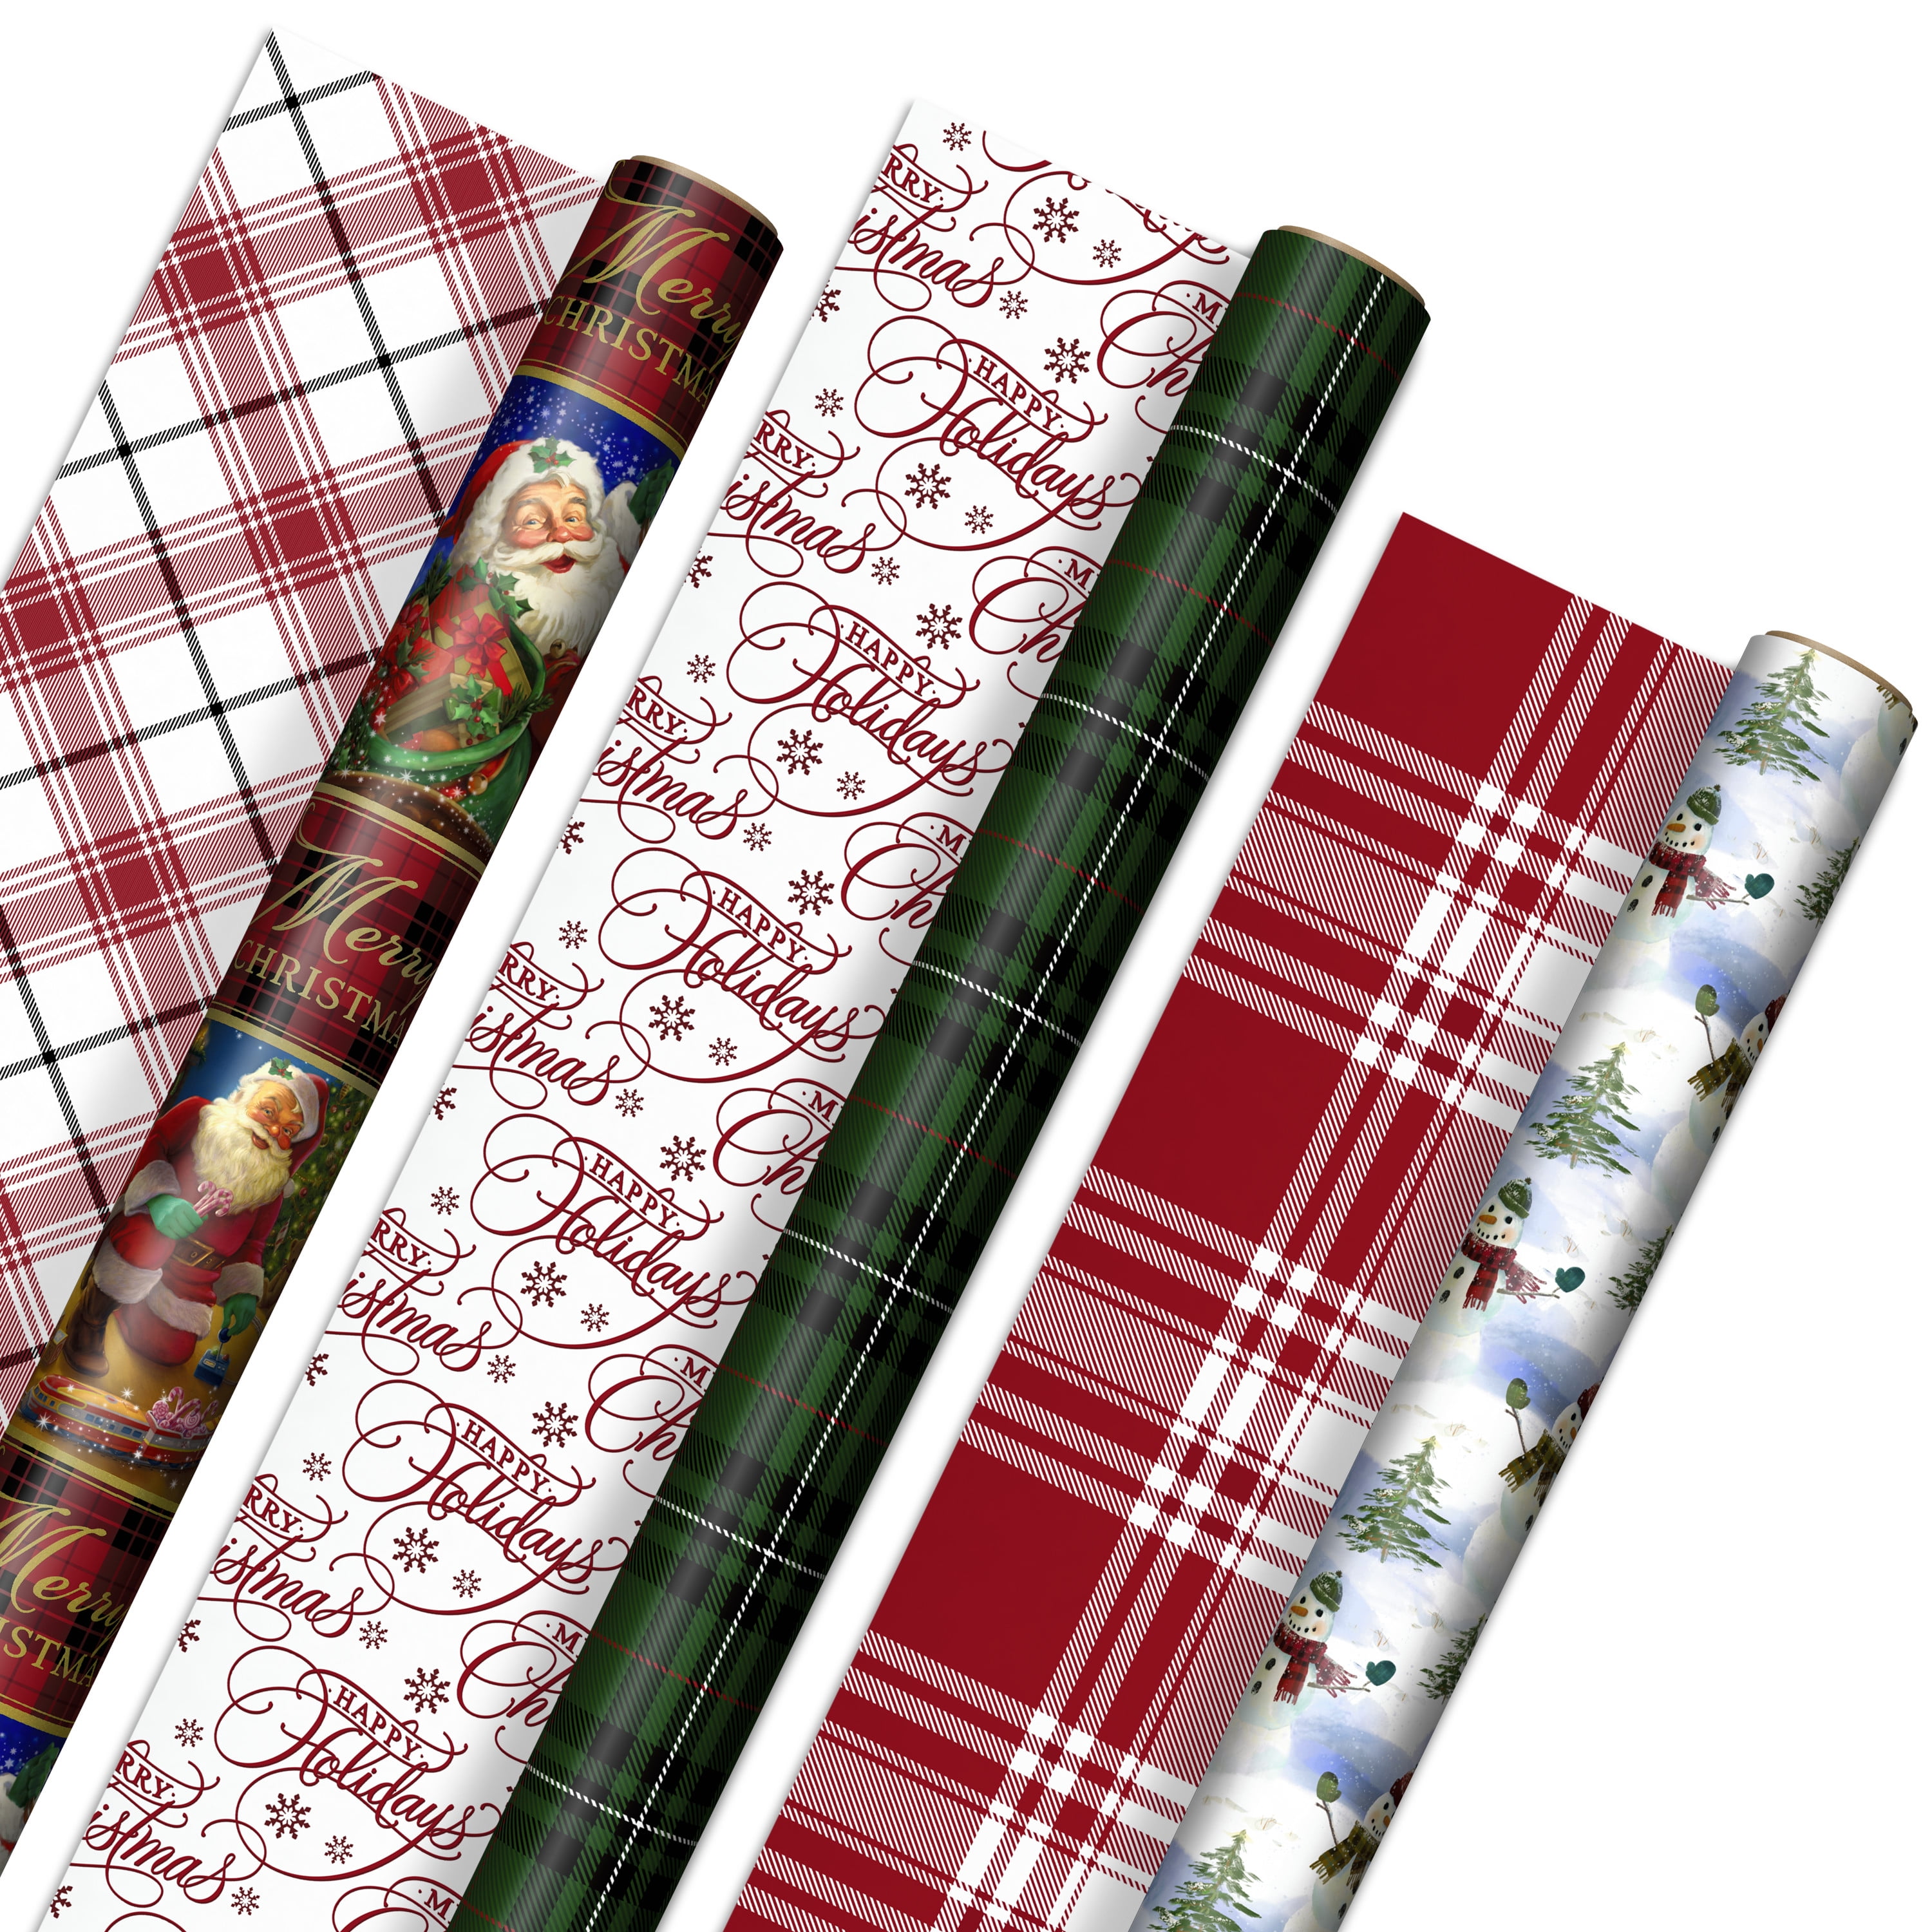 ASSORTED DESIGNS  WRAPPING 15 TRADITIONAL & CUTE MIX CHRISTMAS GIFT WRAP SHEETS 